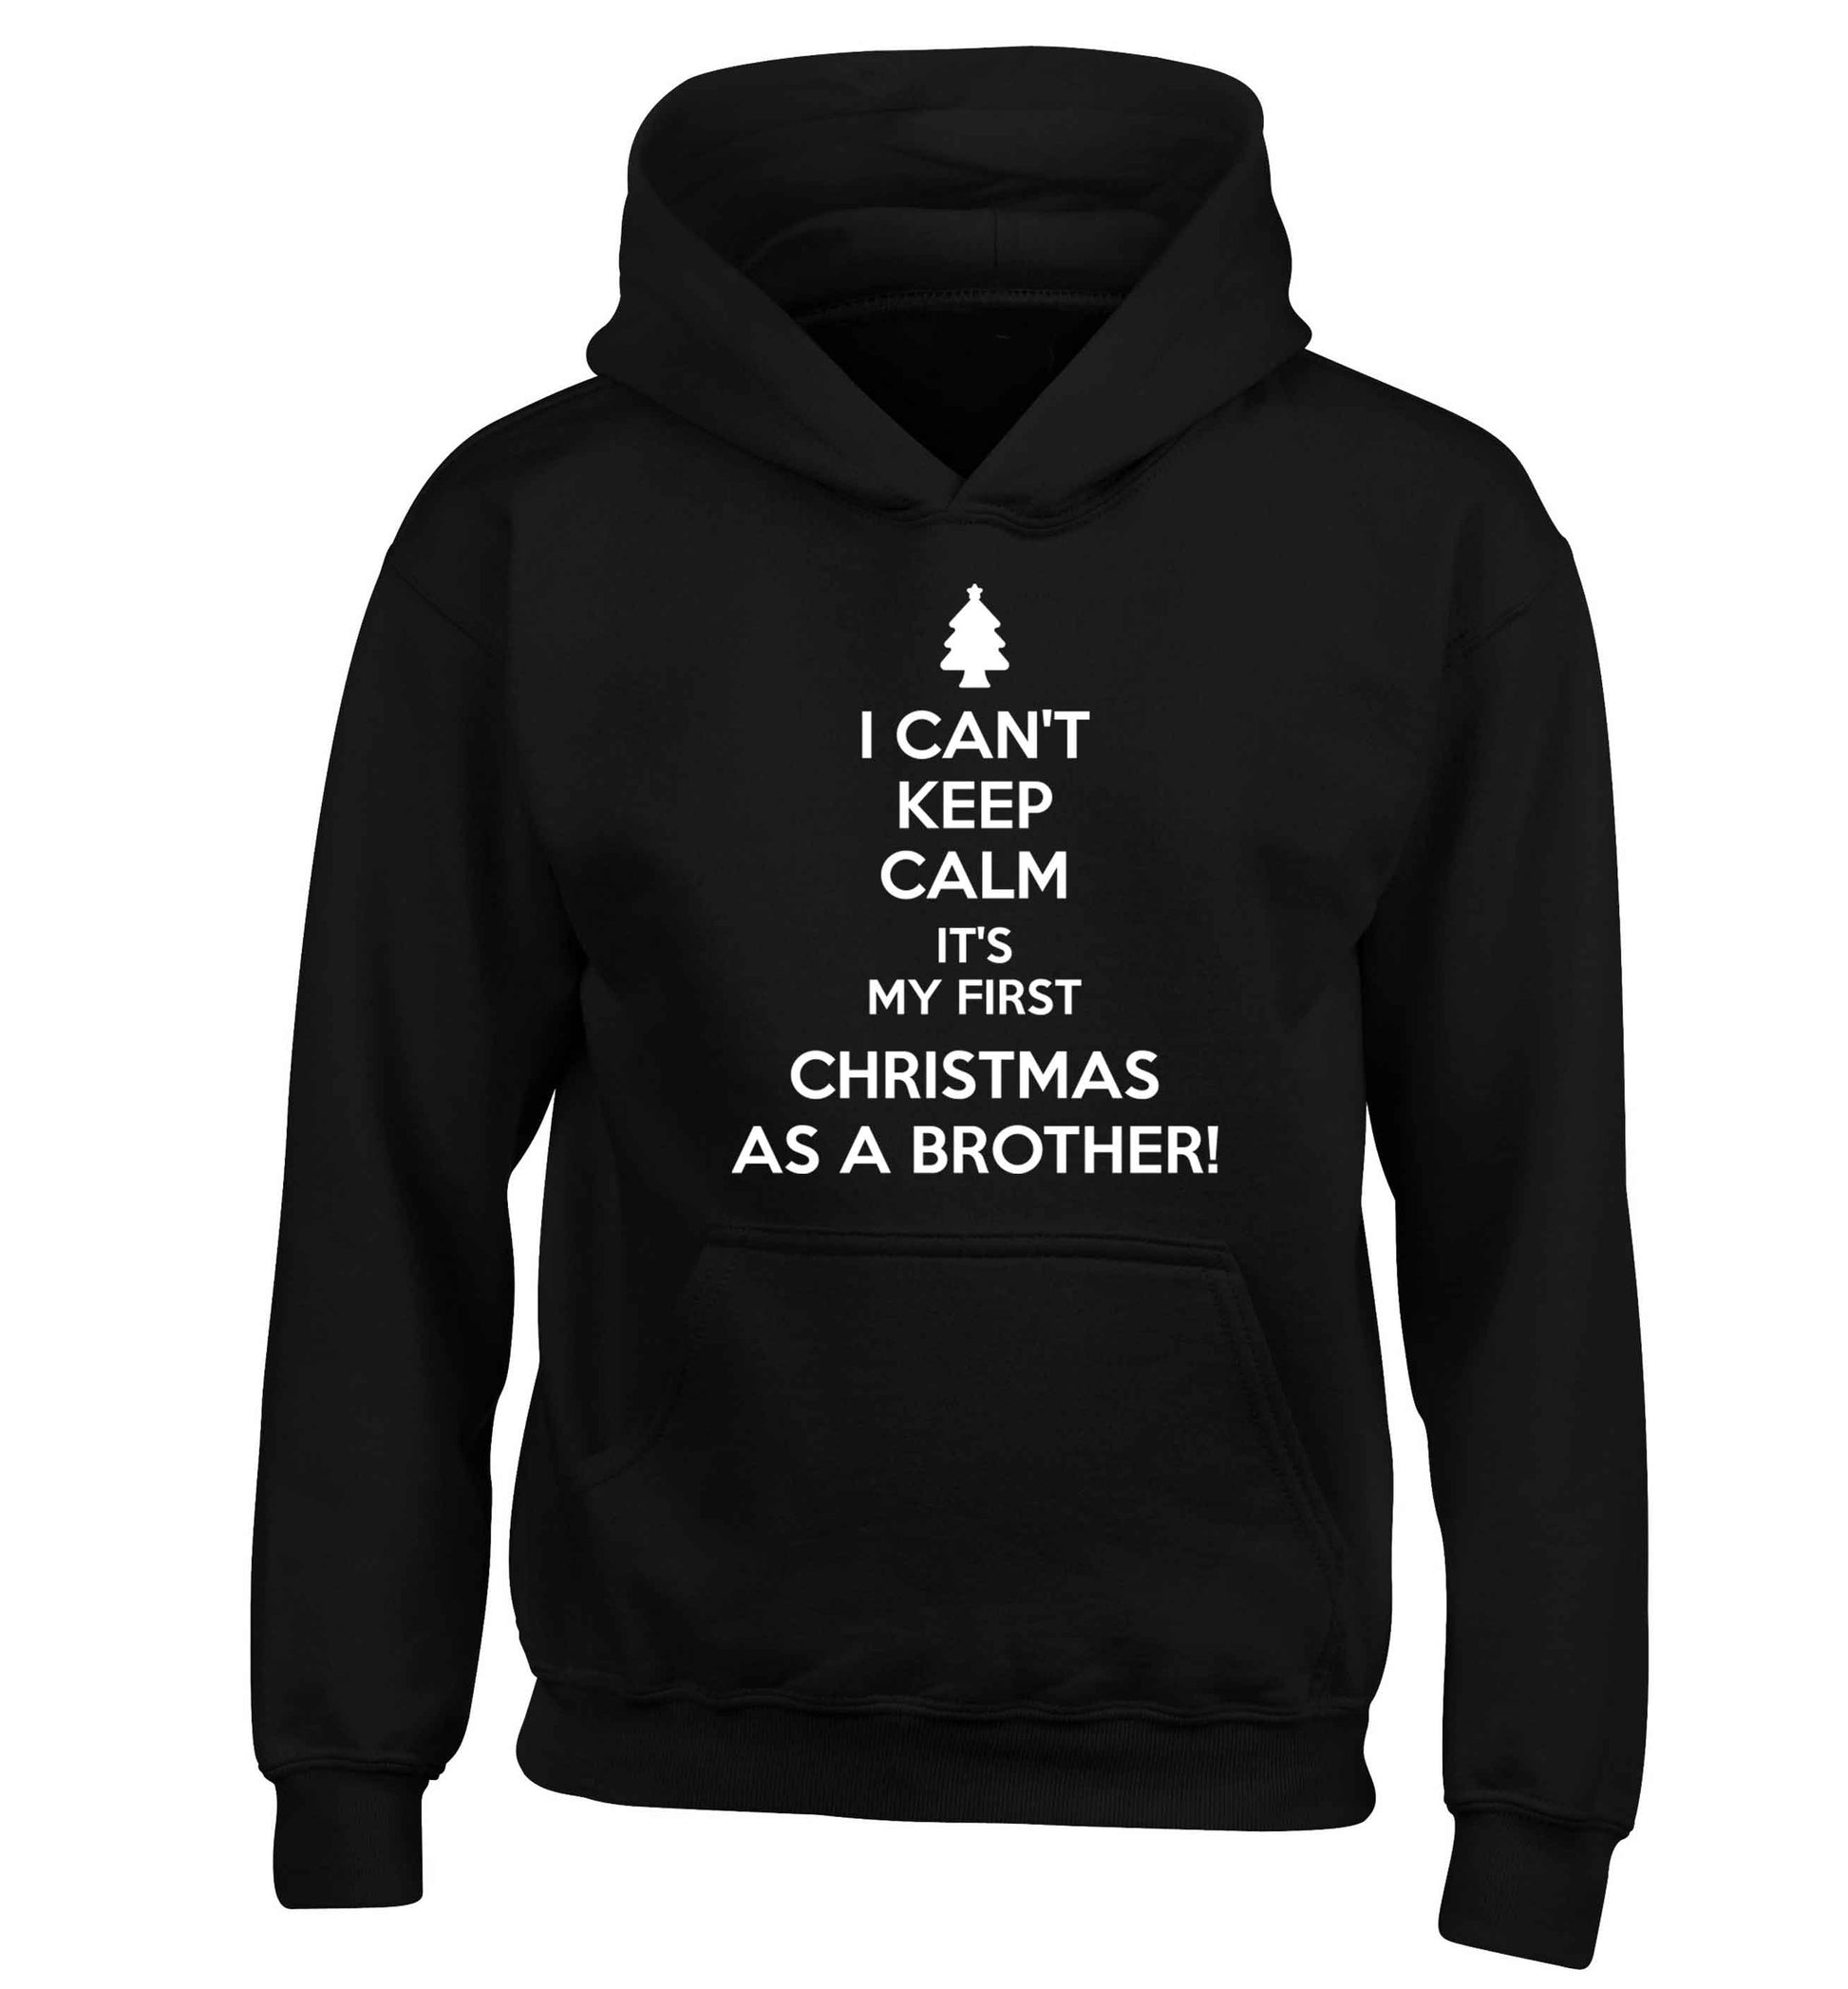 I can't keep calm it's my first Christmas as a brother! children's black hoodie 12-13 Years